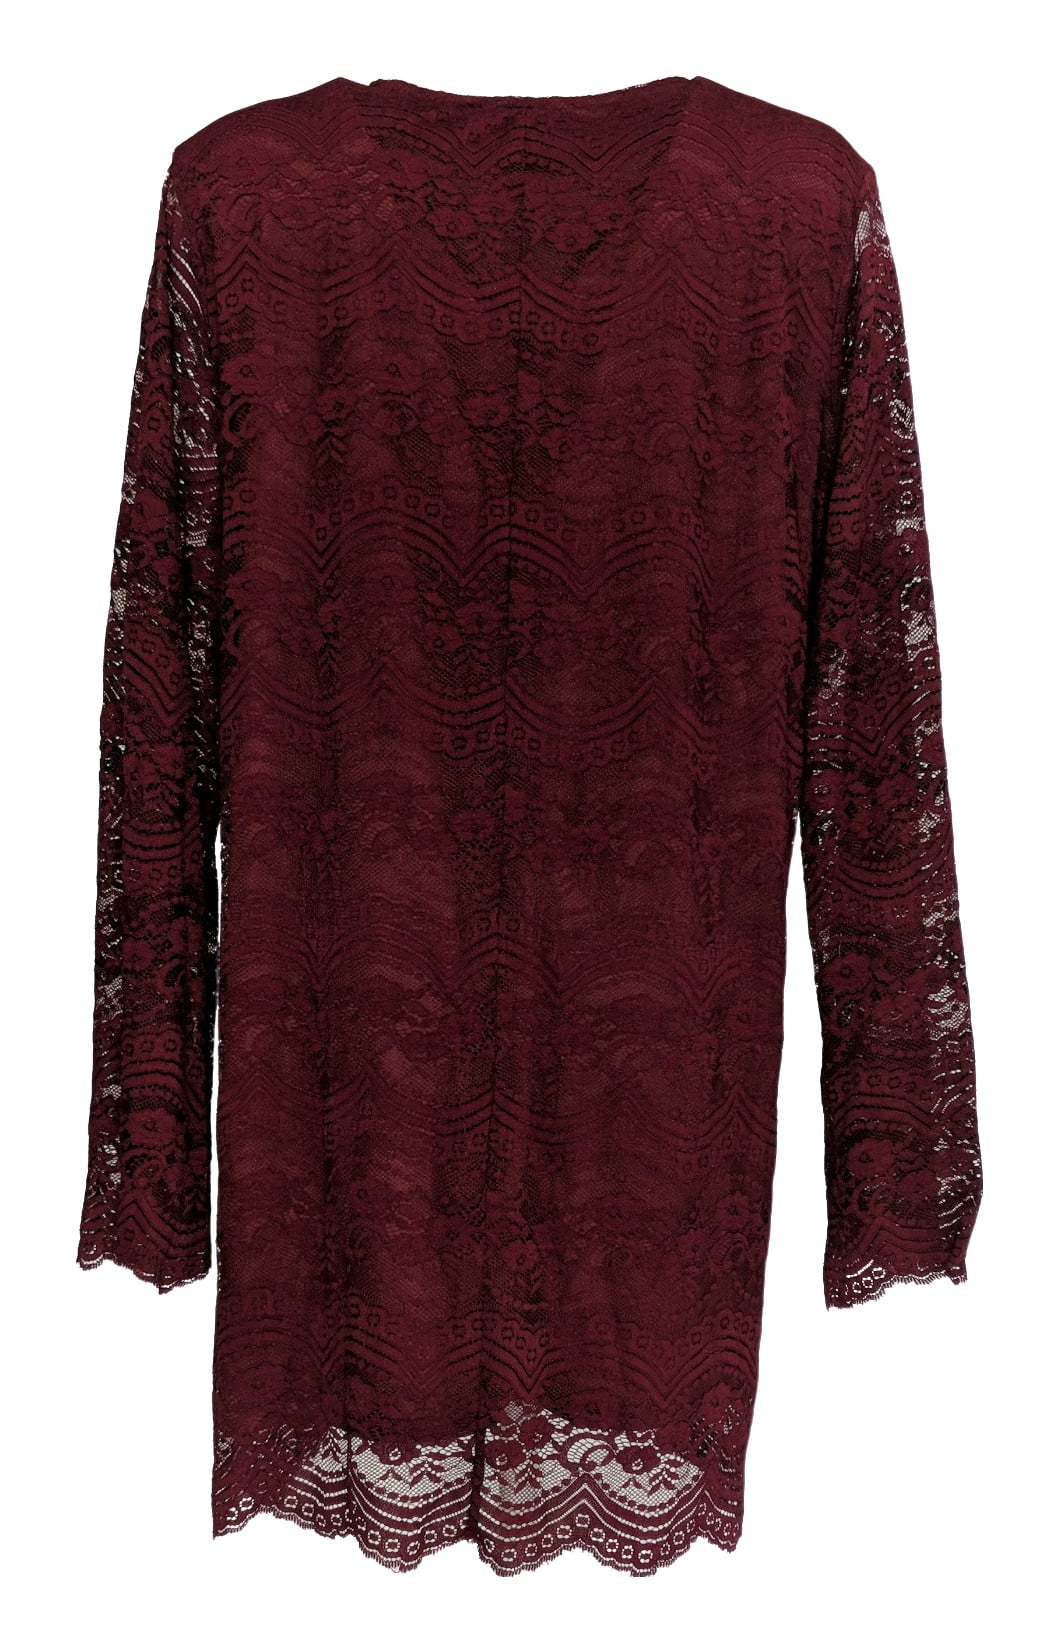 3X Lace-Up Long Sleeve Tunic Merlot Red 